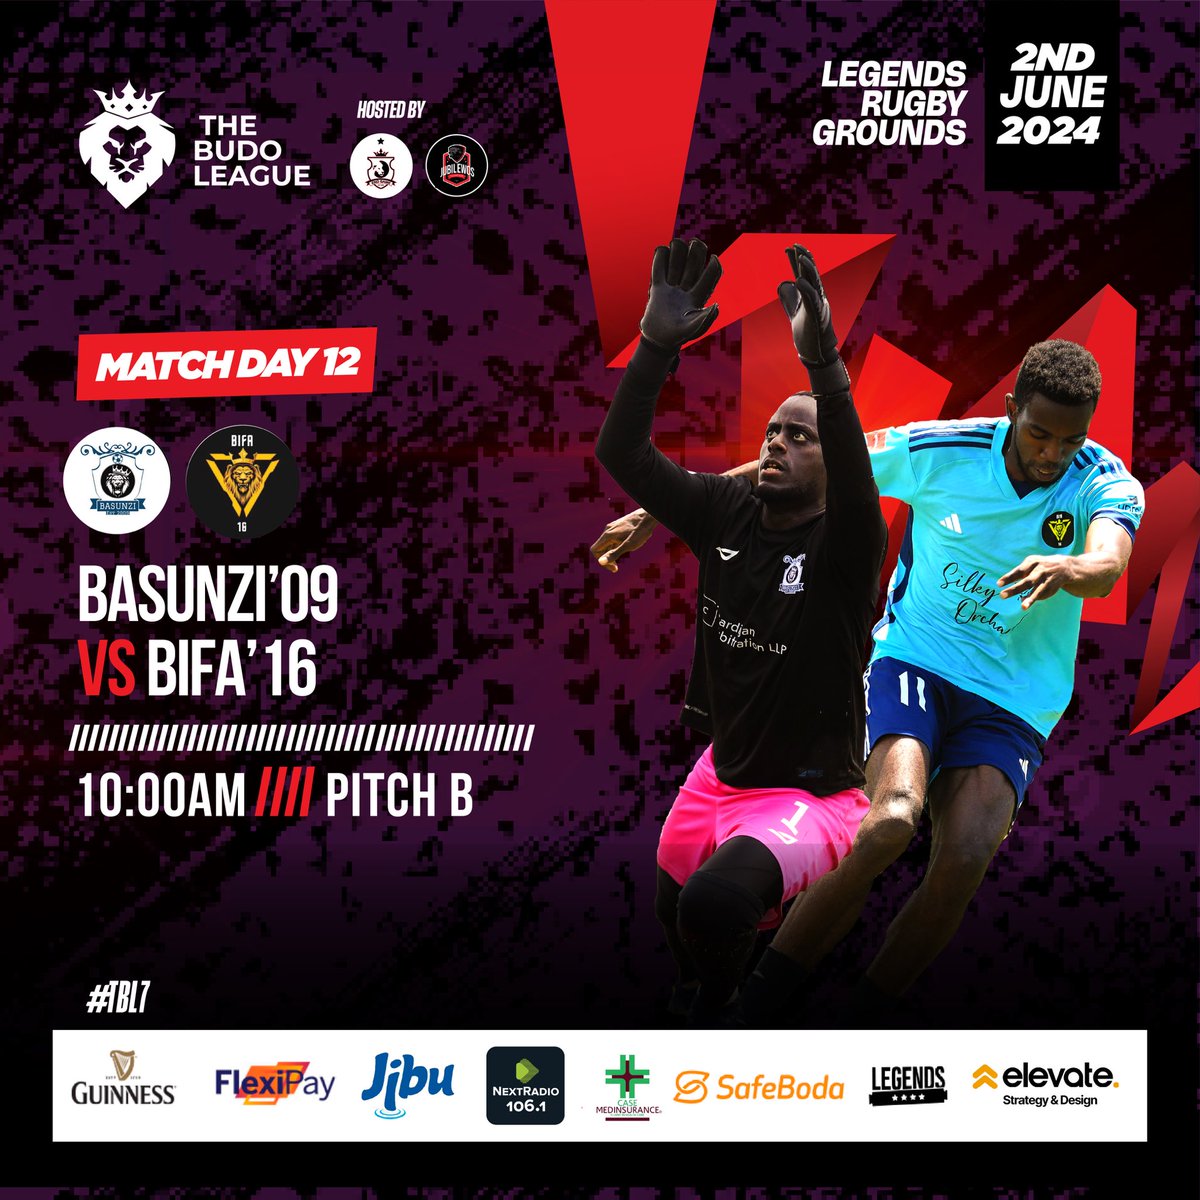 Early kick off alert 🚨🚨
@BIFA_2016 face their first challenge of the season this Sunday @TheBudoLeague 

#TBL7 
#TheBasunziway